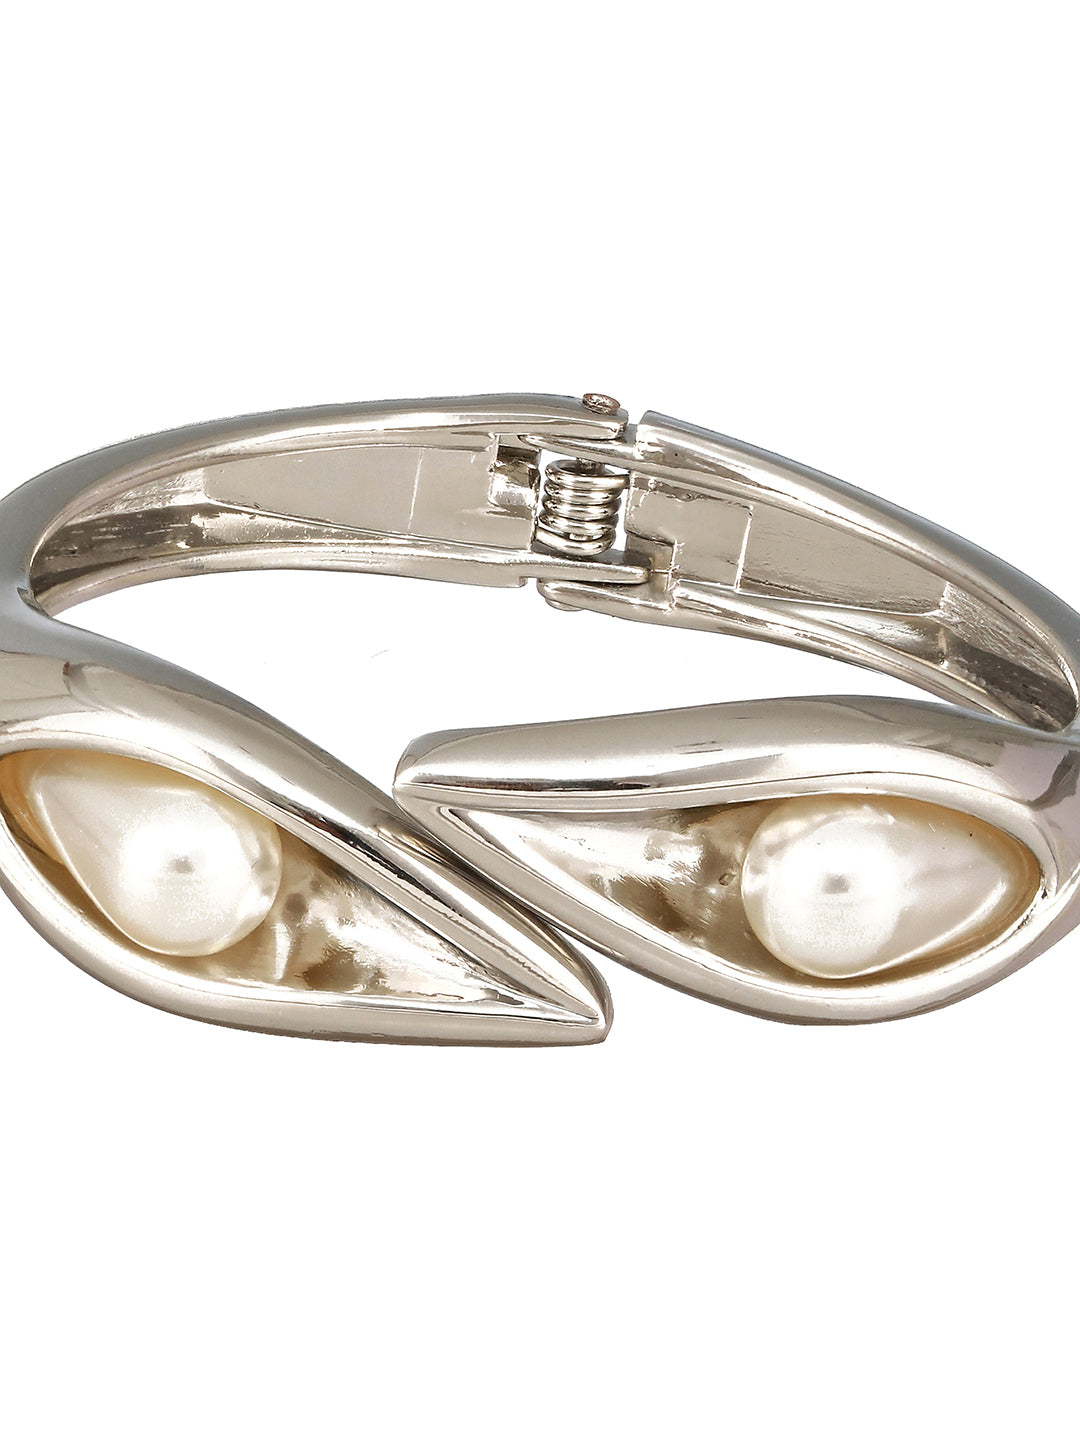 JAZZ AND SIZZLE Silver-Plated Pearl Beaded Cuff Bracelet - Jazzandsizzle